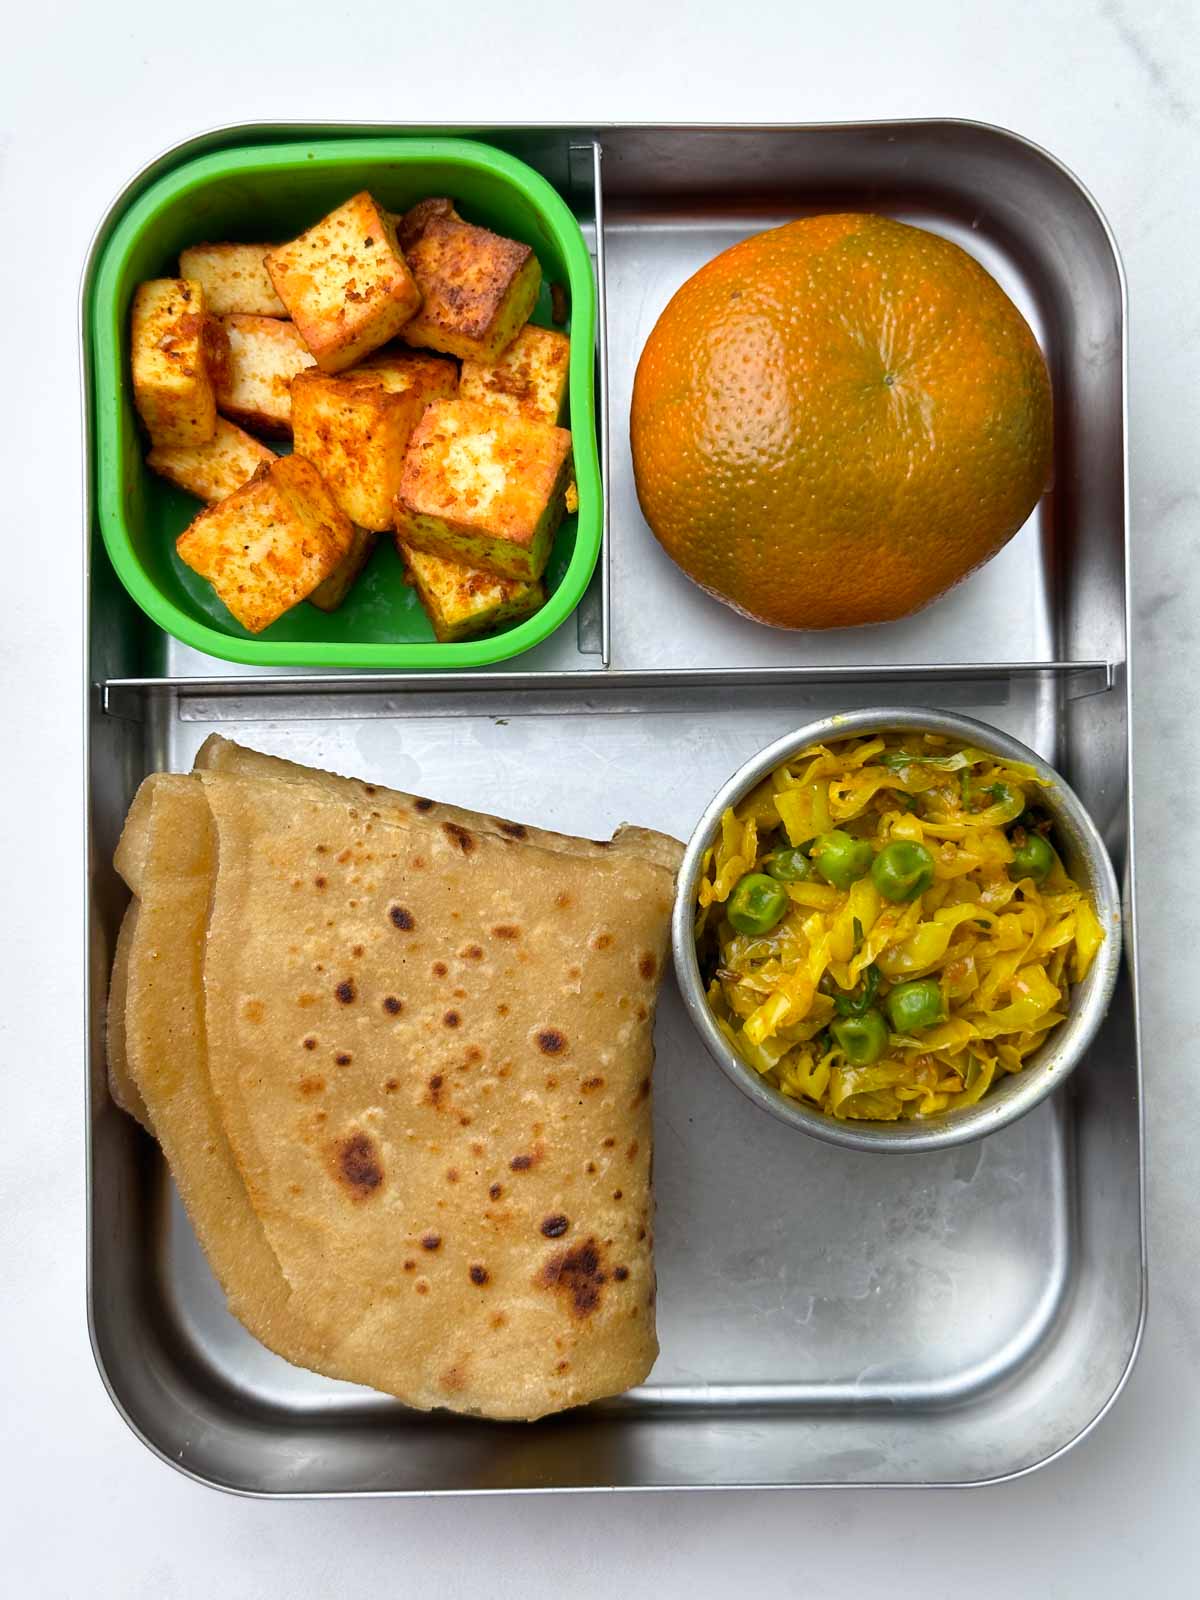 Paratha with cabbage peas stir fry, orange and masala paneer in the bento steel box